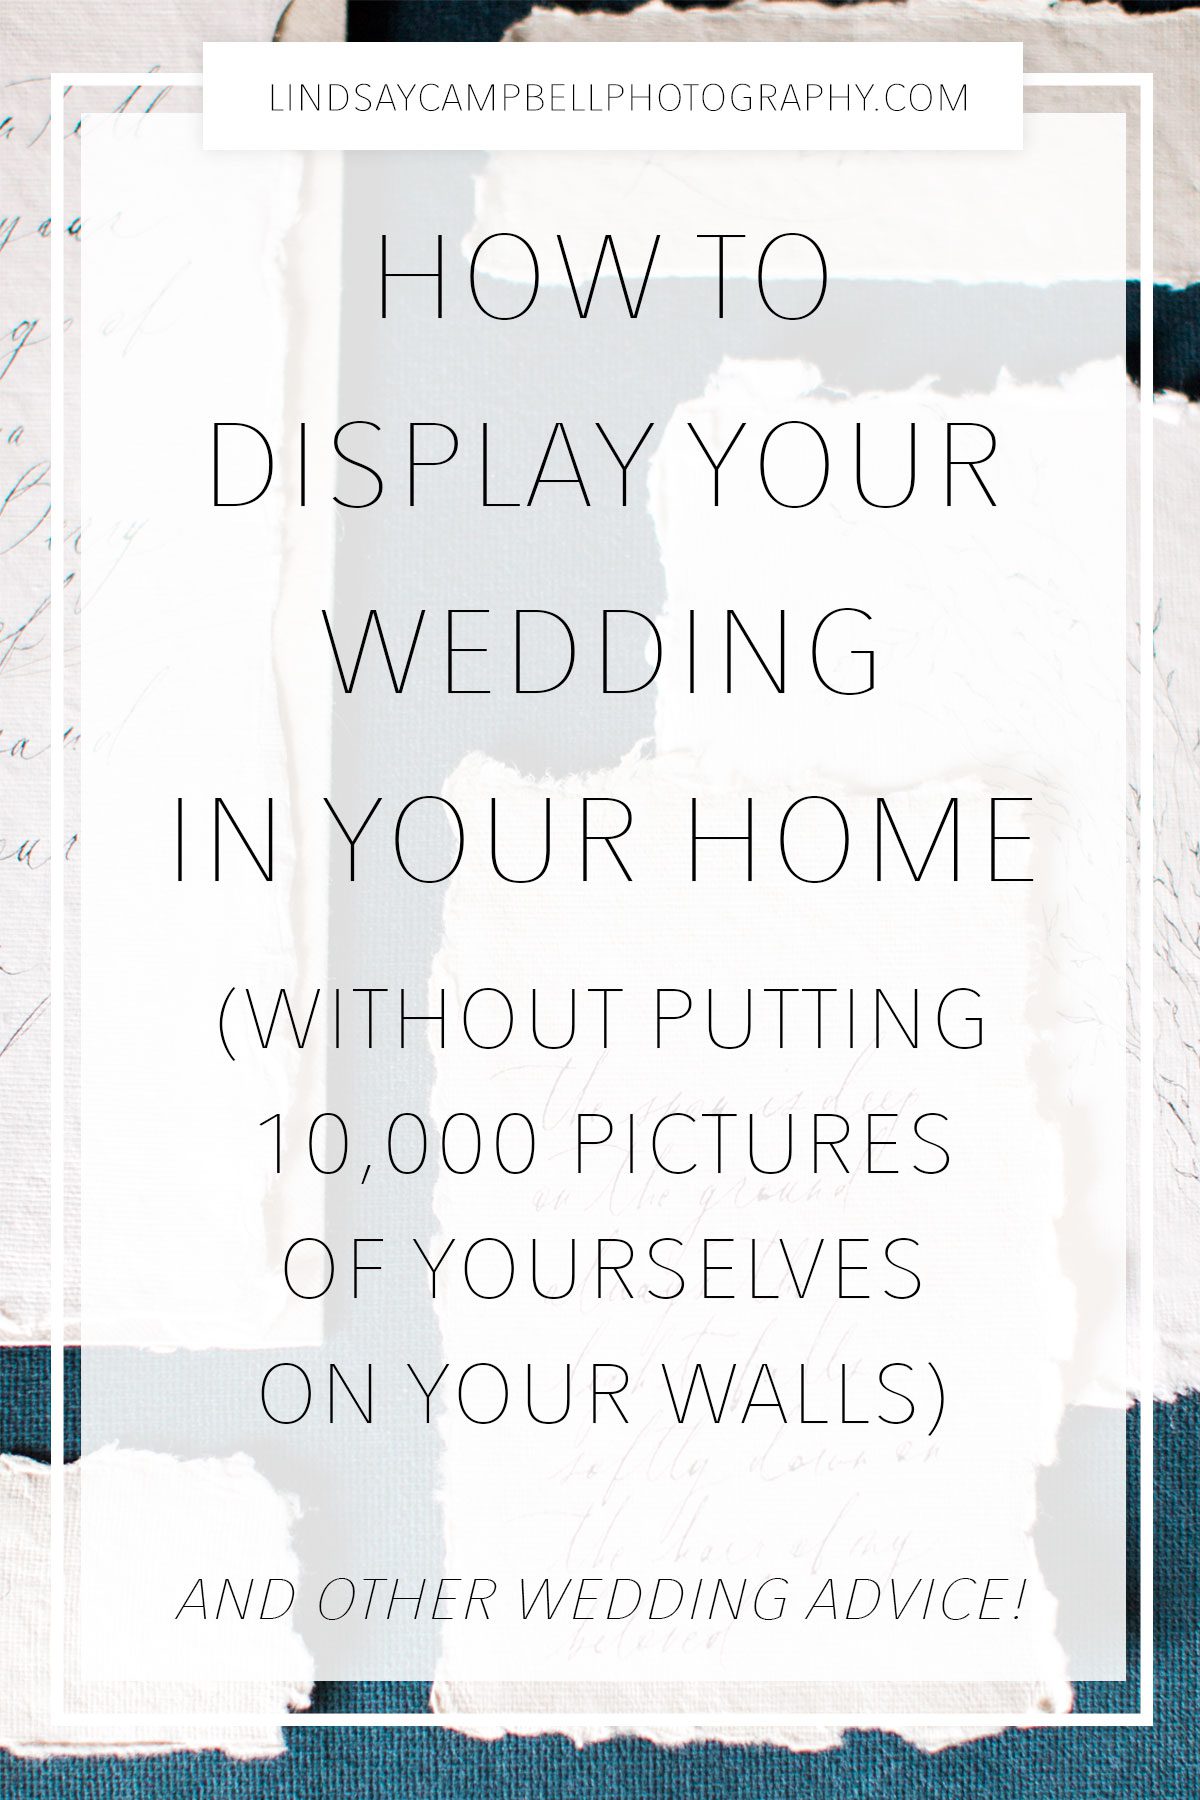 How-to-display-your-wedding How to Display Your Wedding in Your Home